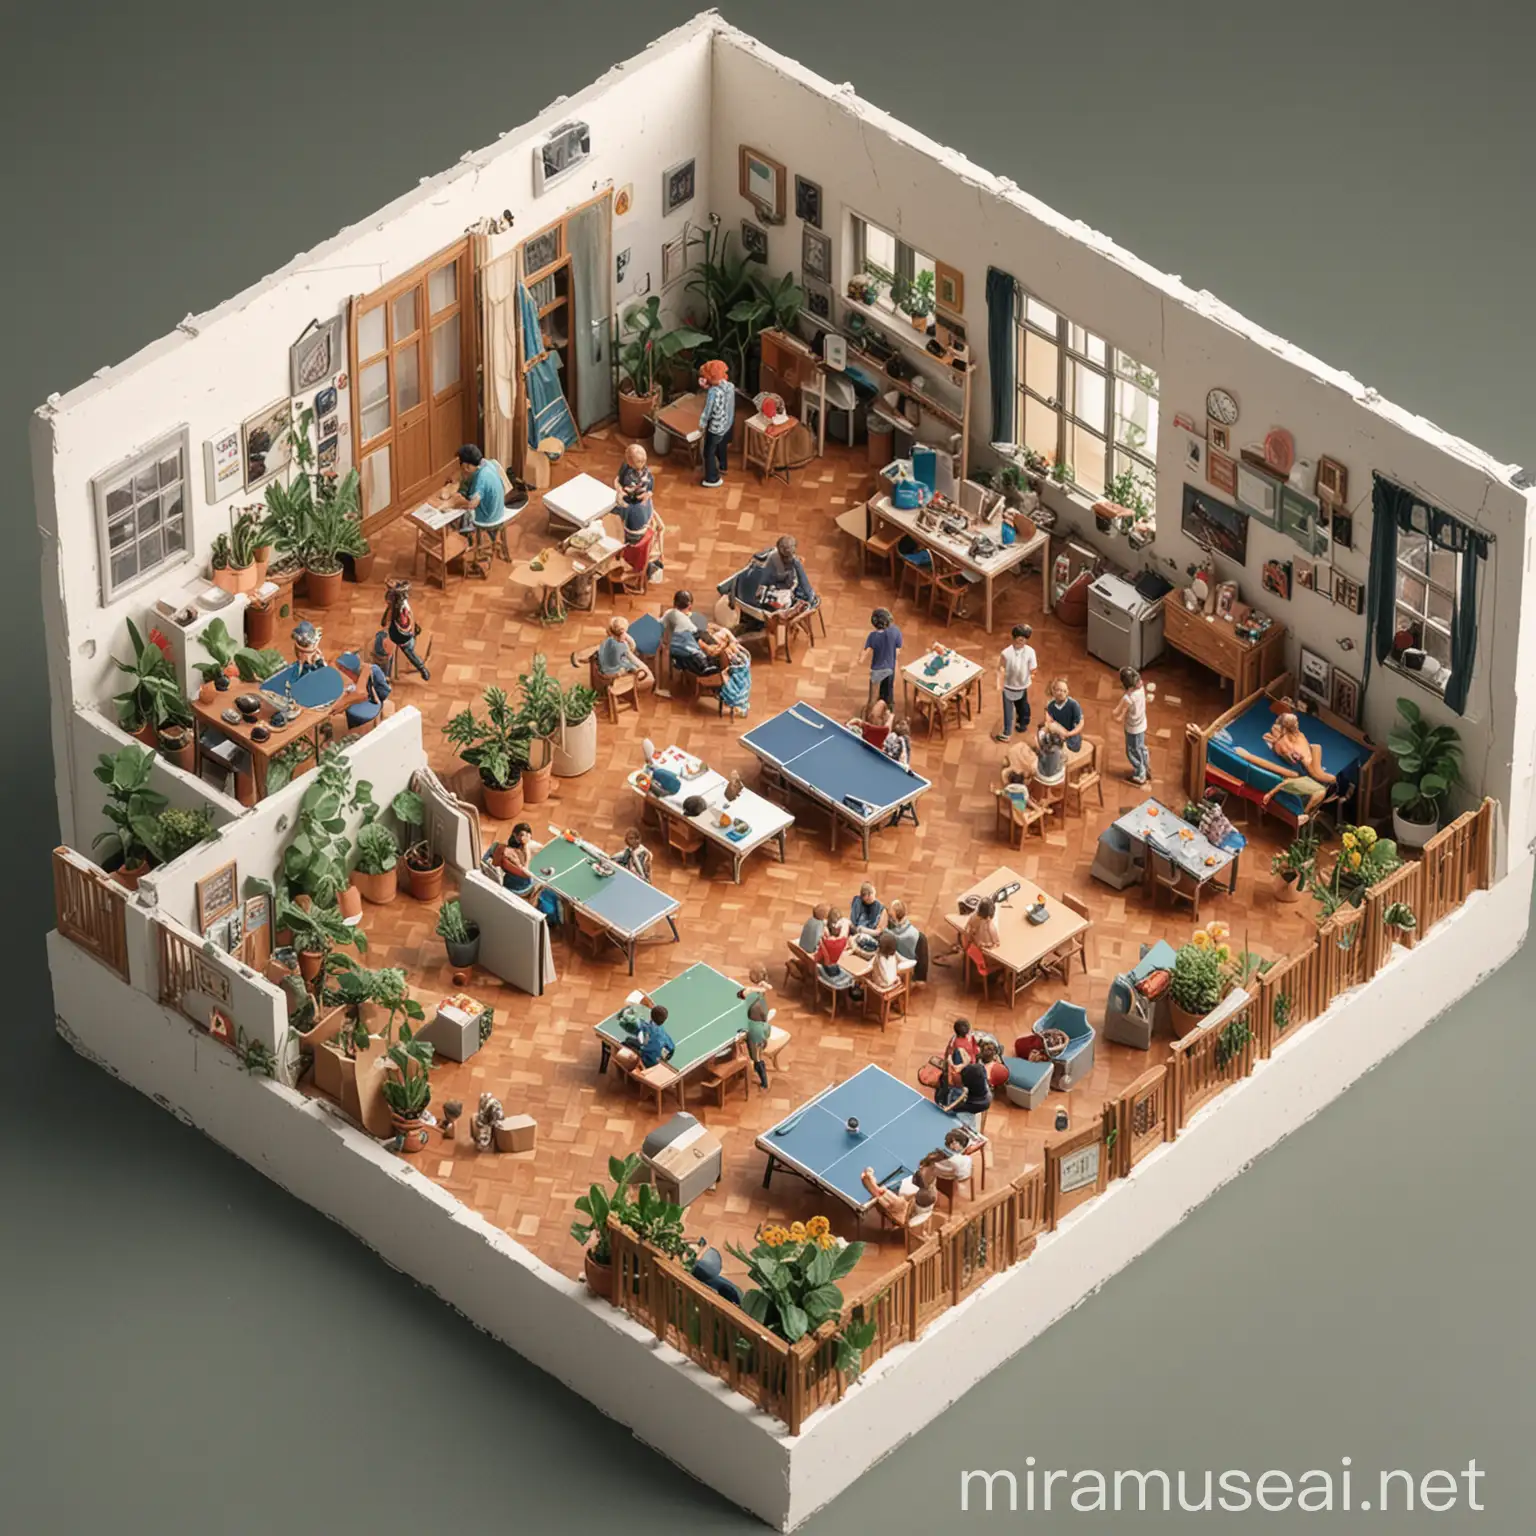 I would like a building with an isometric view. Different leisure activities take place in each room. Each room should be the same size, approx. 15m². and there should be a lot of people. It's about young people having fun

Room 1: Band room - guitar - DJ-Pult
Room 3: Sport room - Treadmill, fitness equipment
Room 4: Dance room - People dancing
Room 5: Painting room (studio) - a lot of artist - art supplies - paintings
Room 6: Table tennis 
Room 7: Plant room
Room 8: Party room (a lot of people dancing - small space)
Room 10: Tutoring room (teaching)

Outdoor: Big Garden and flowers and a swimming pool in which someone swims

parking spaces, bikes, co-working space,